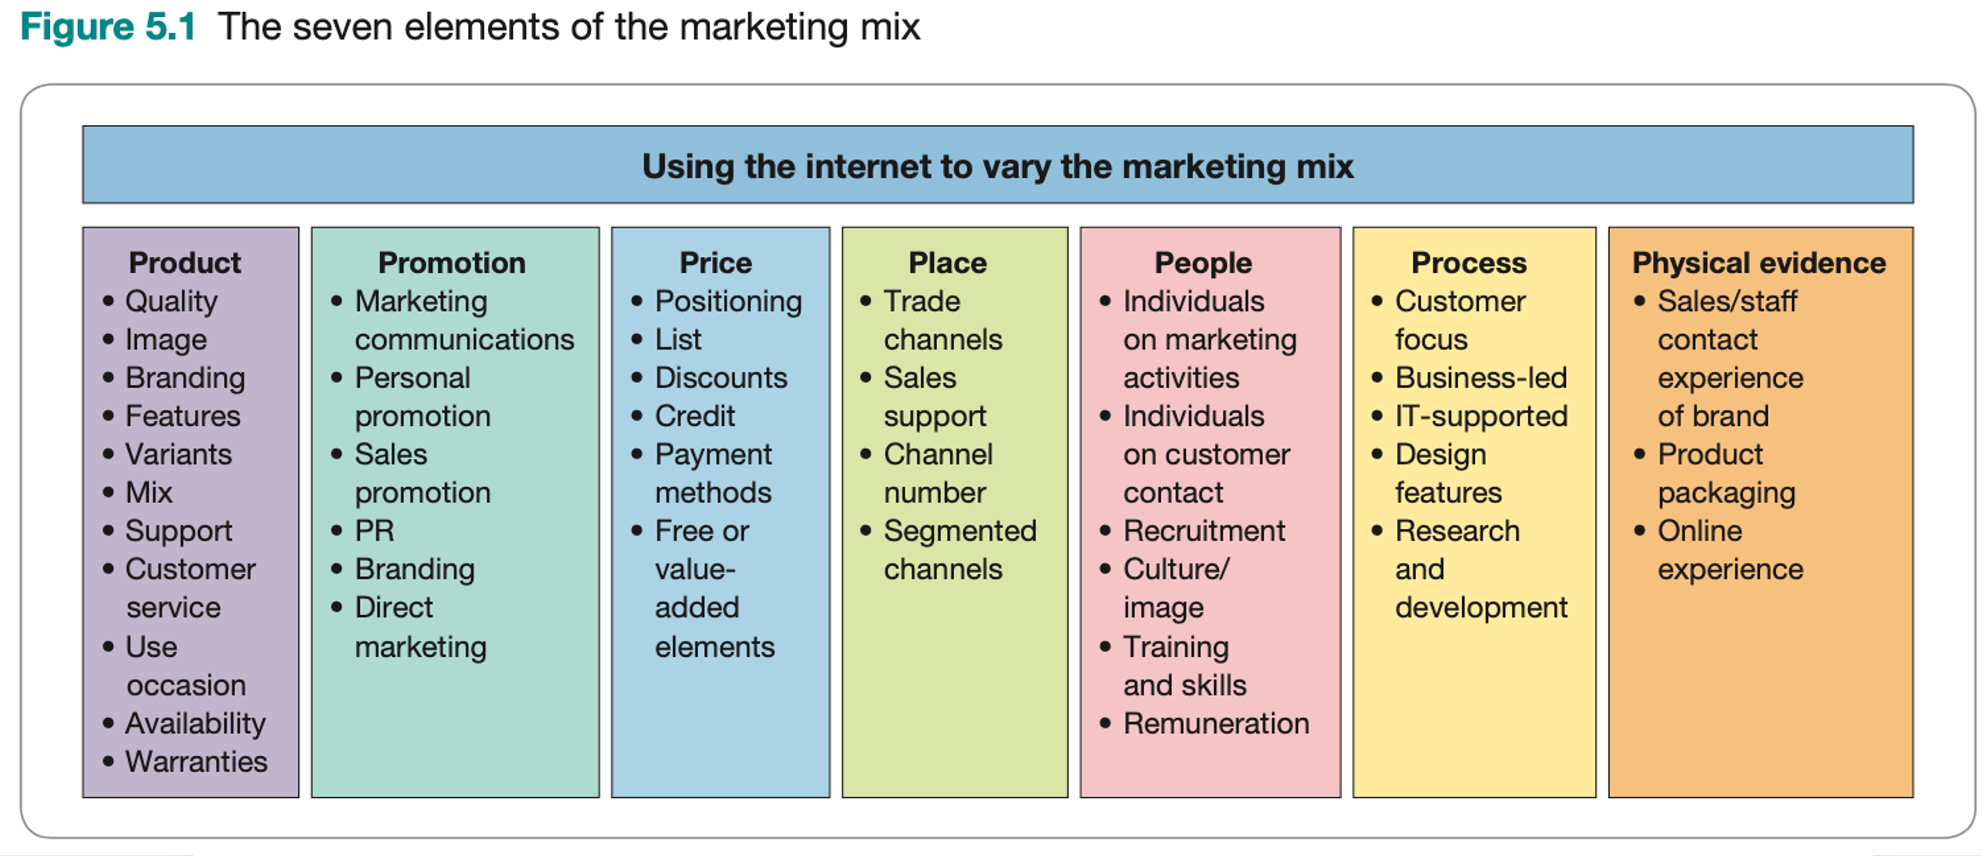 What is people in the 7 P's of marketing?